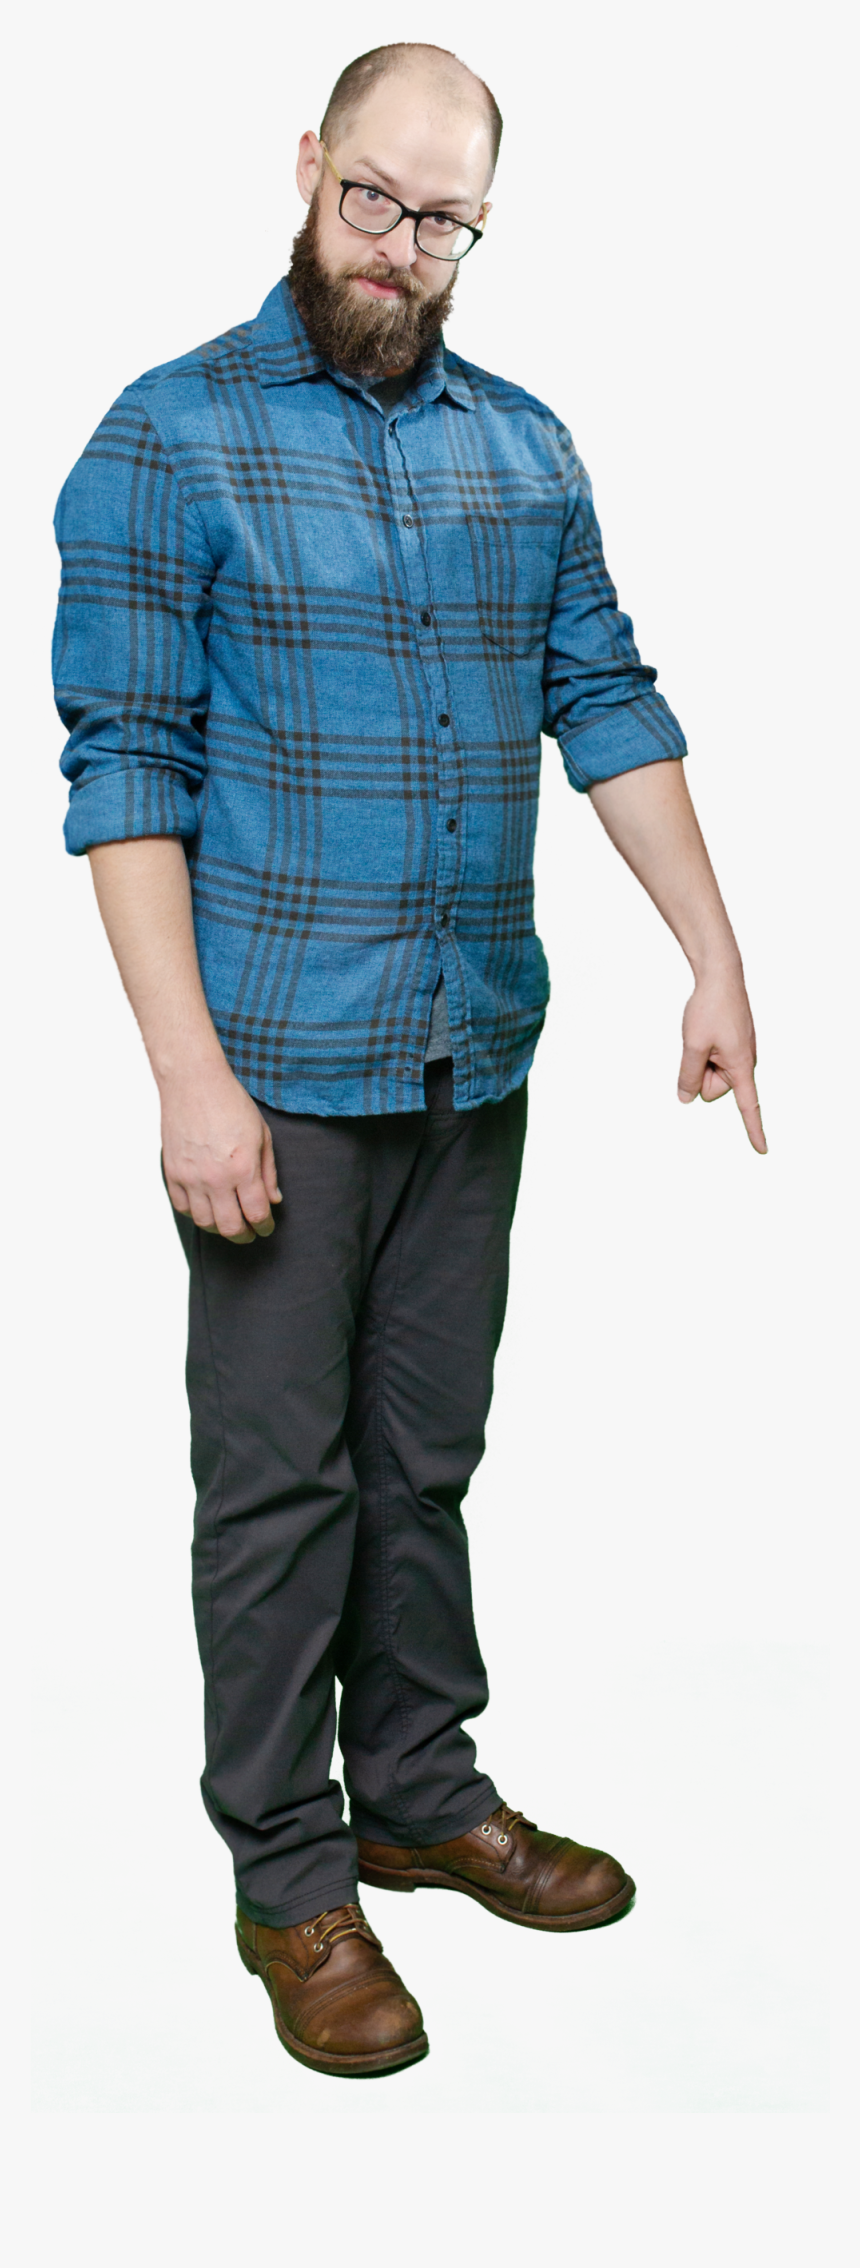 Mike Nate Bout Mike - Standing, HD Png Download, Free Download